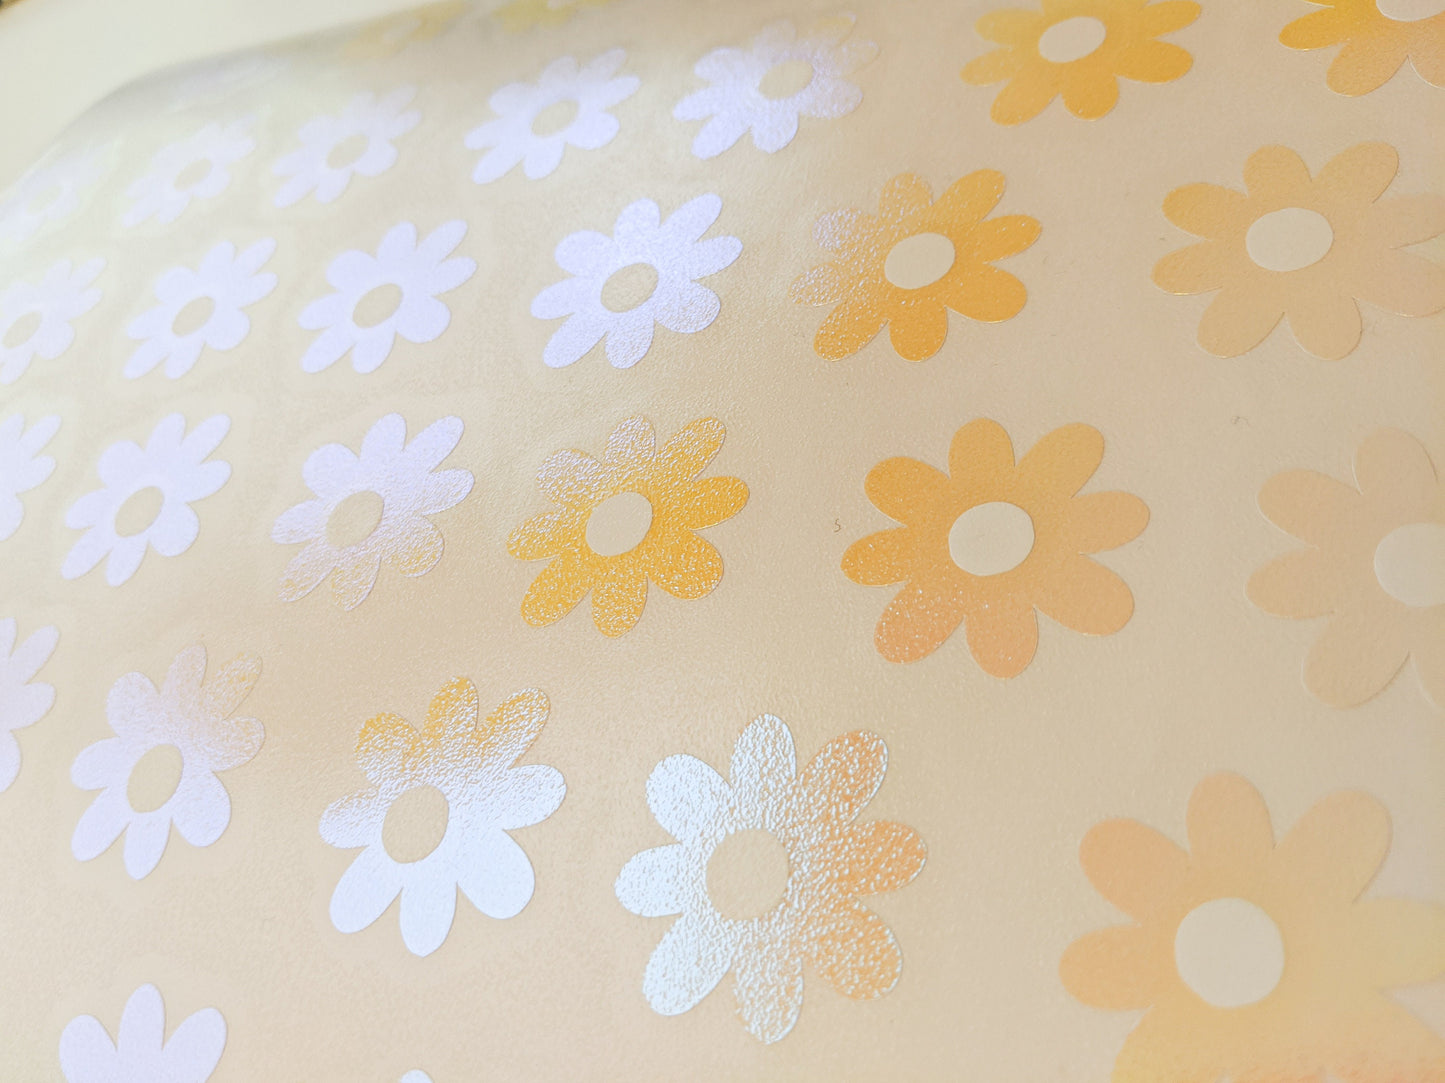 Sweet Daisy Vinyl Sheets to cover any smooth flat surface!